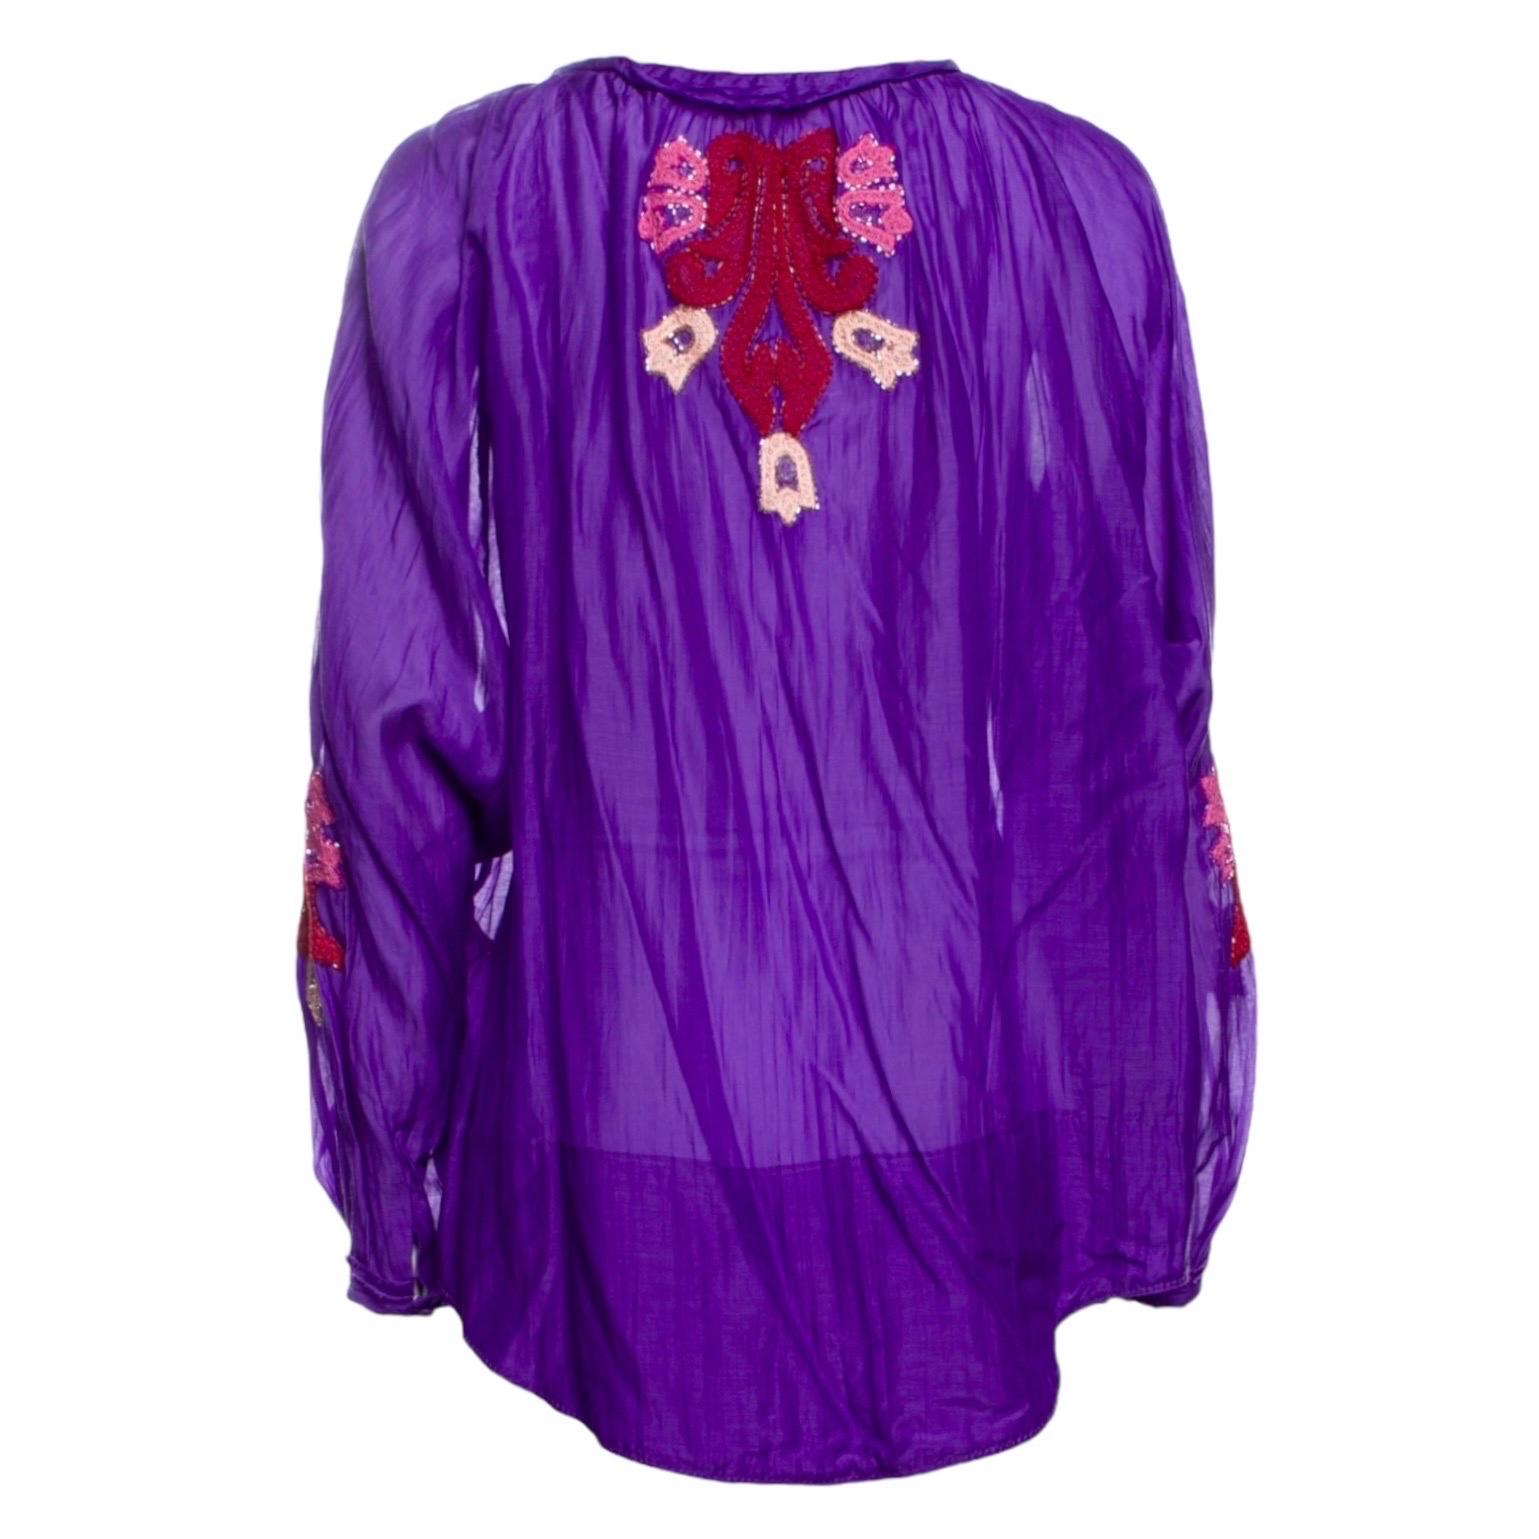 UNWORN Emilio Pucci by Peter Dundas Embroidered Kaftan Tunic Top Blouse 46 In New Condition For Sale In Switzerland, CH